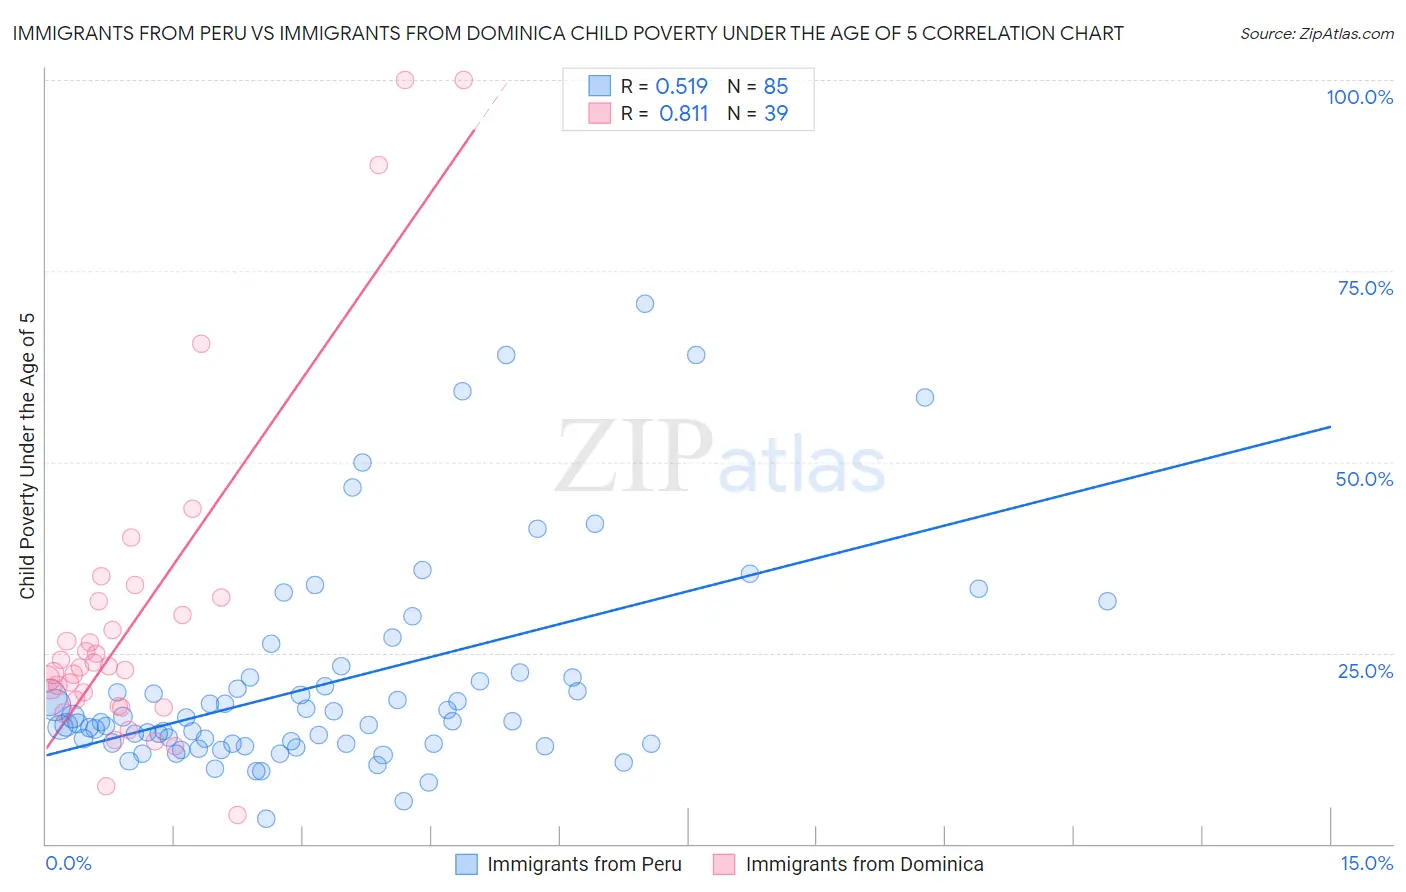 Immigrants from Peru vs Immigrants from Dominica Child Poverty Under the Age of 5